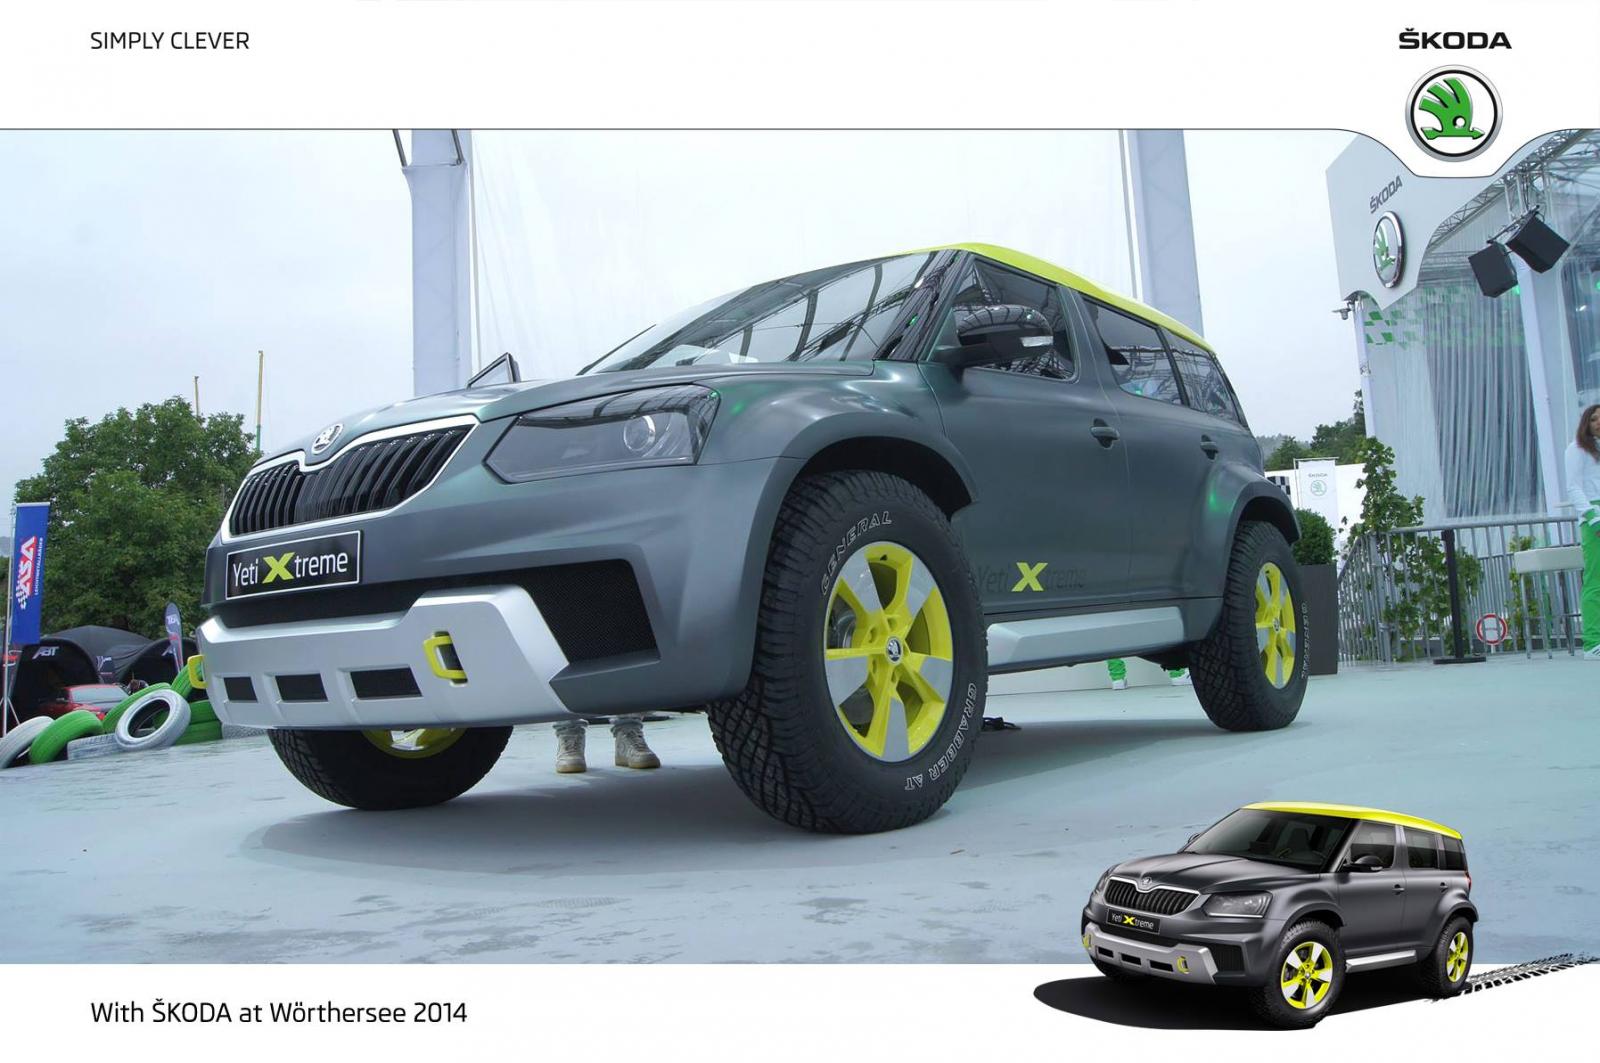 Skoda Yeti Xtreme Concept Worthersee (2014) - high resolution picture 4 of ...